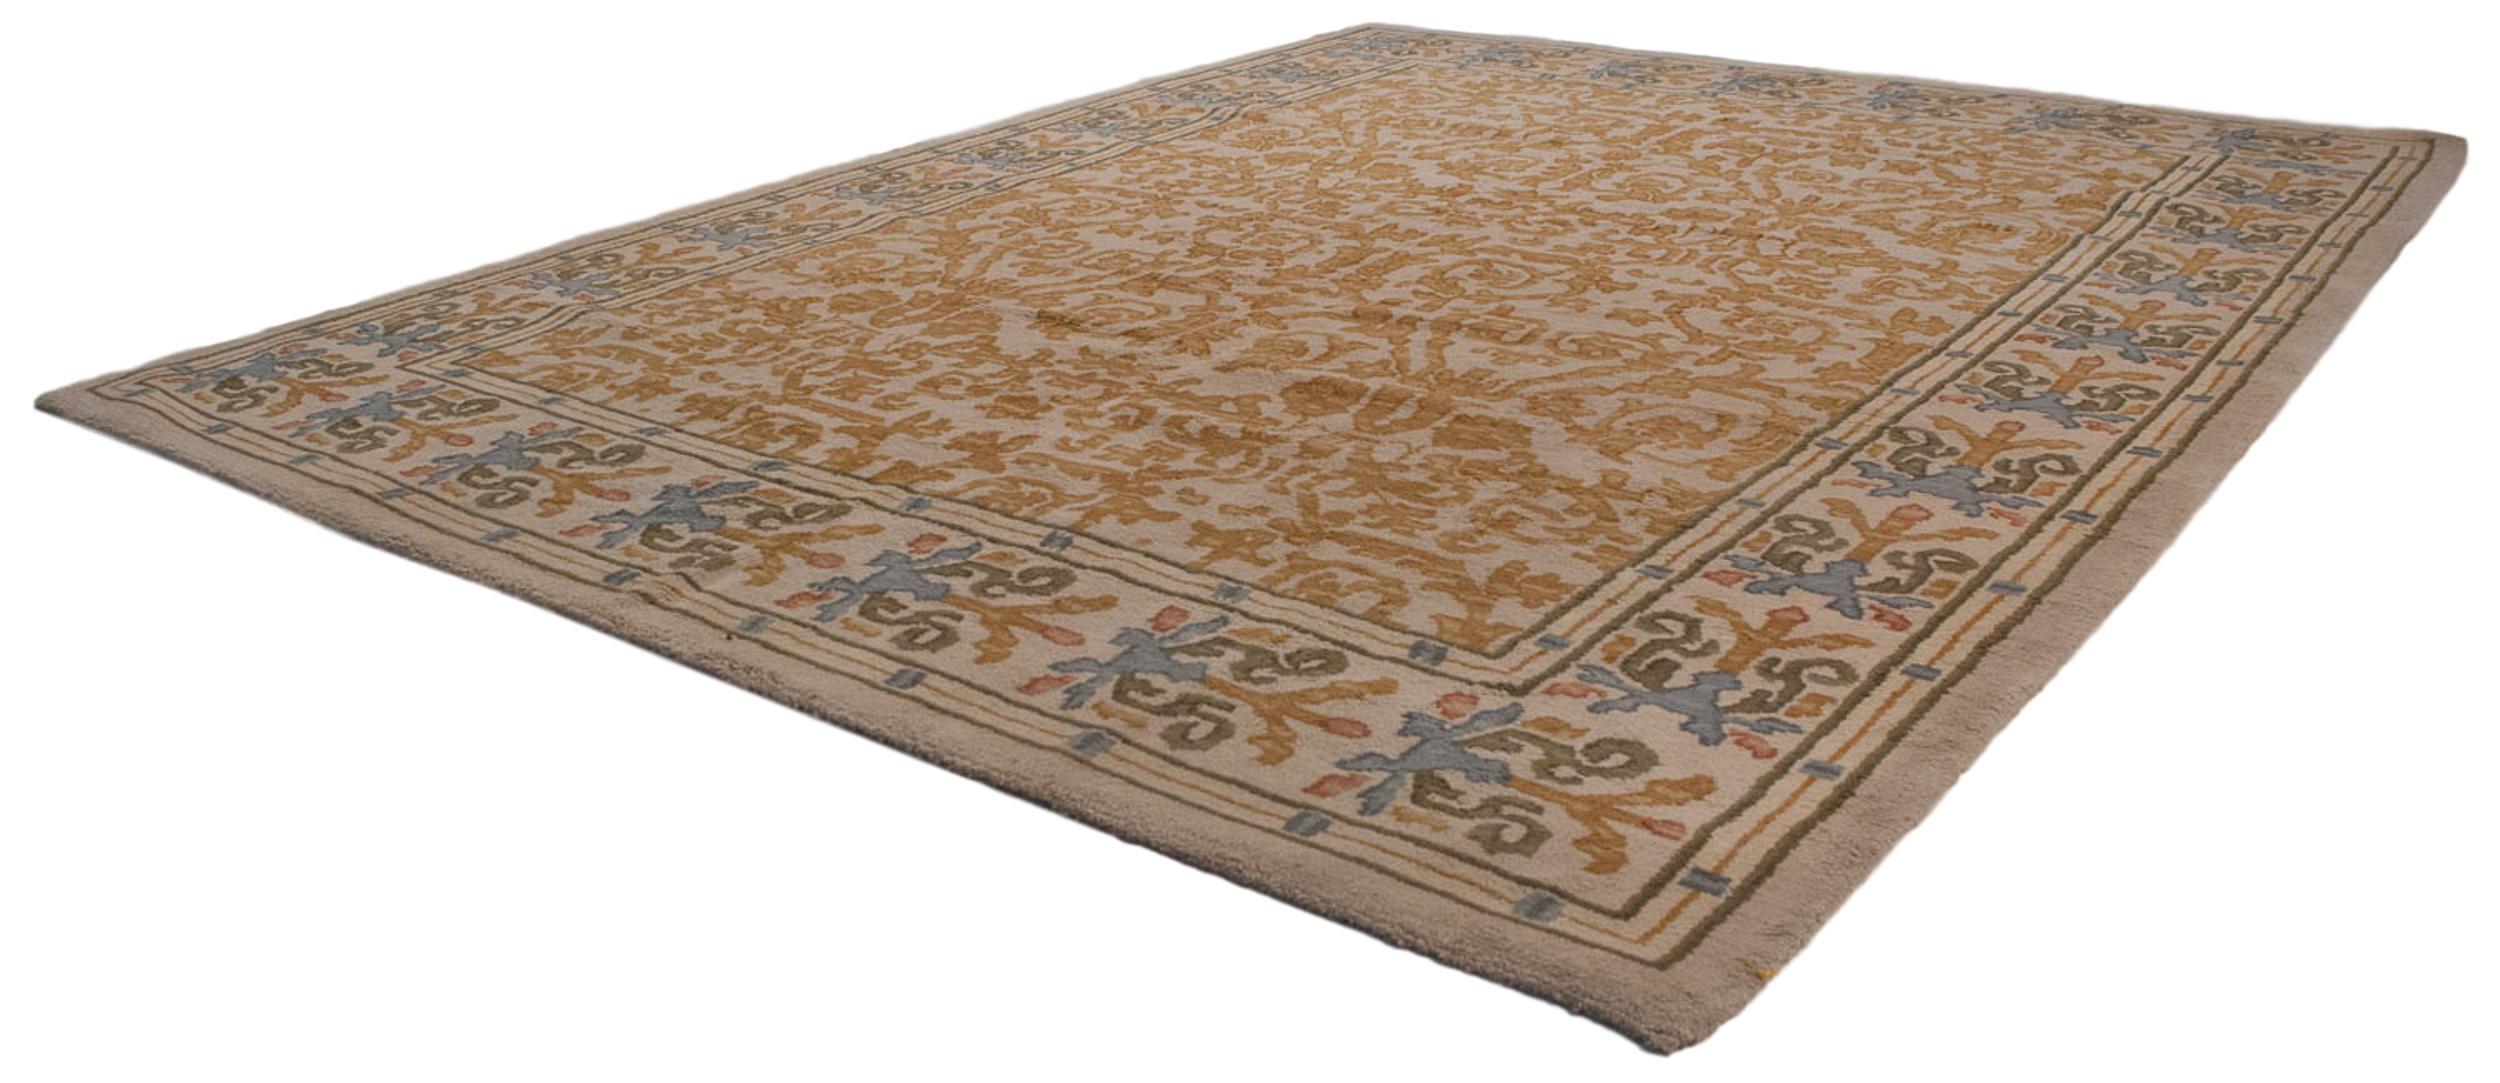 Mid-20th Century Vintage Spanish Arts And Crafts Design Carpet For Sale